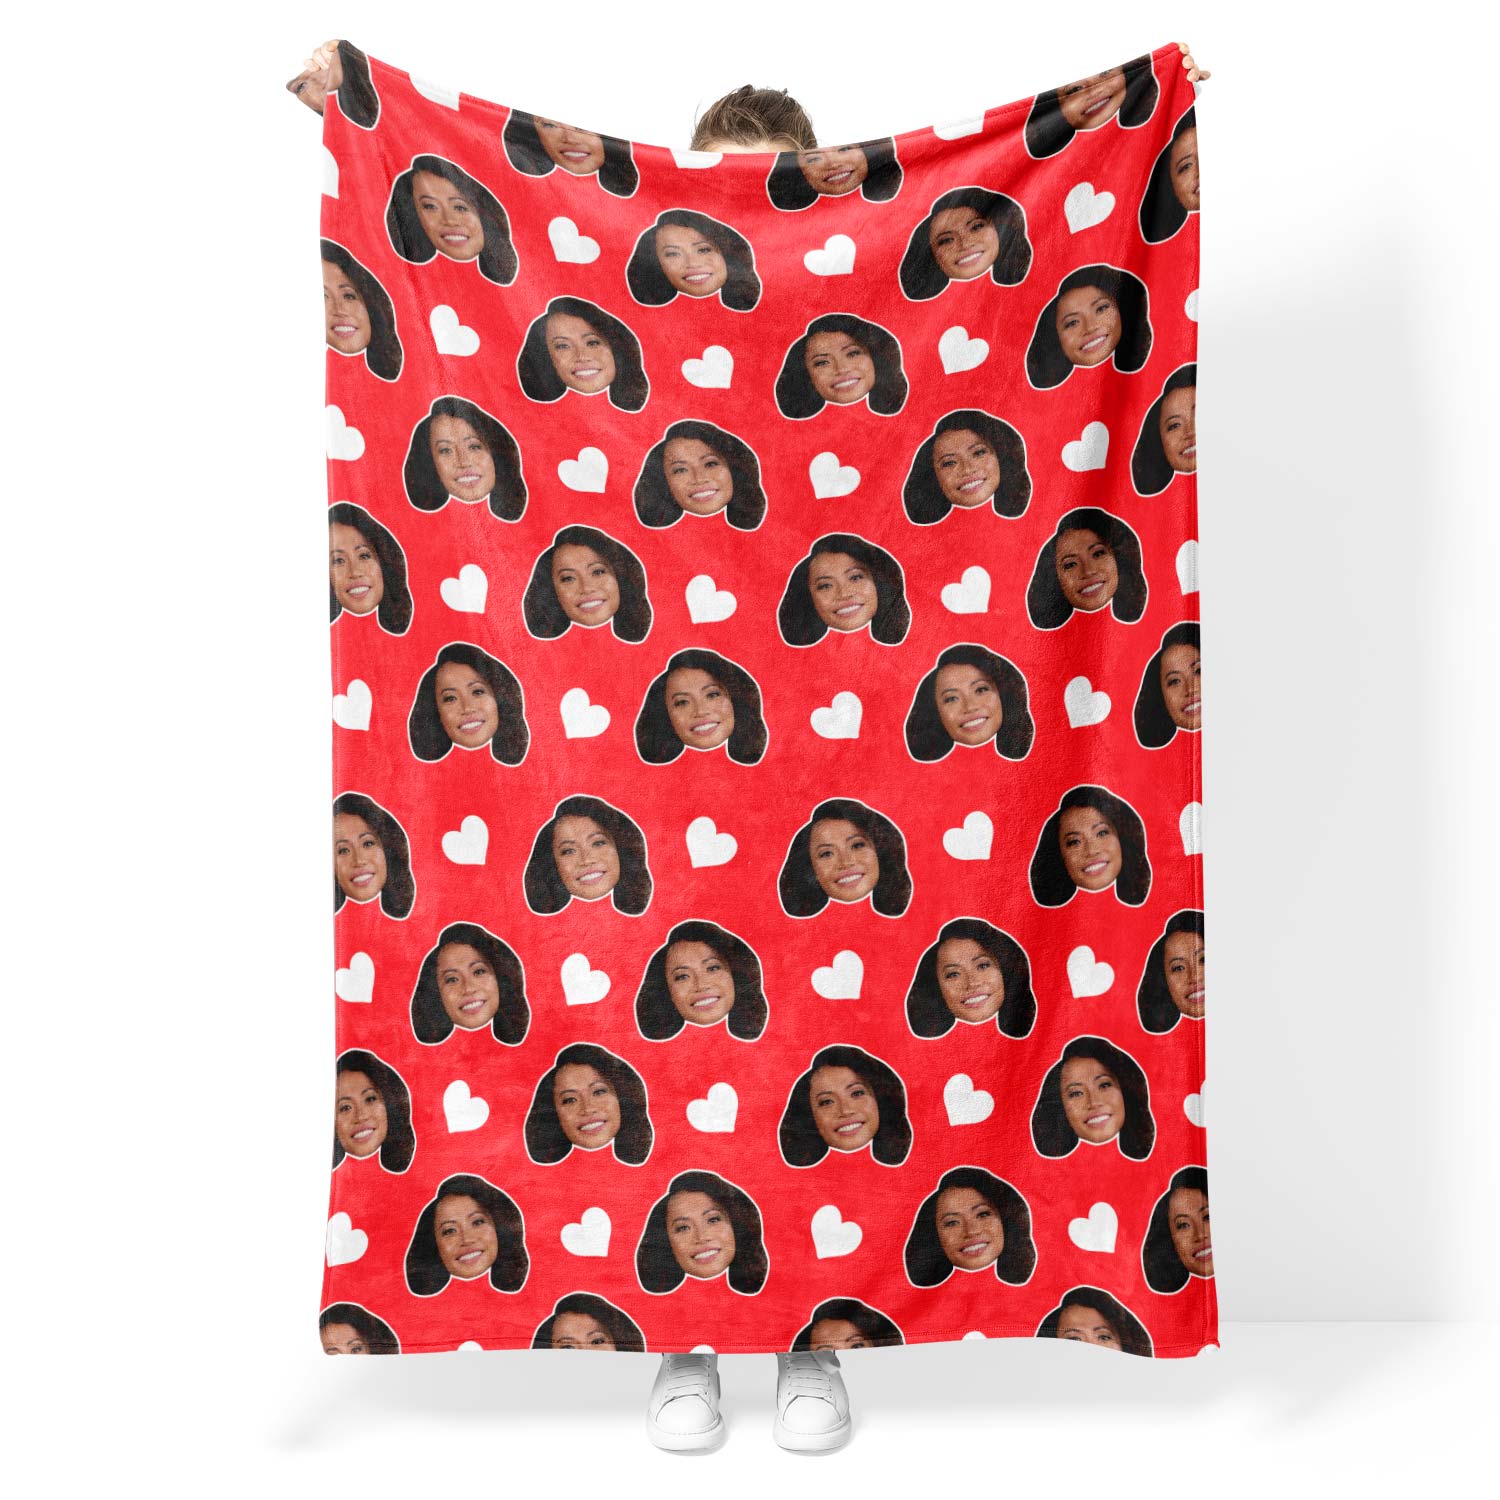 Face Hearts Personalised Blanket